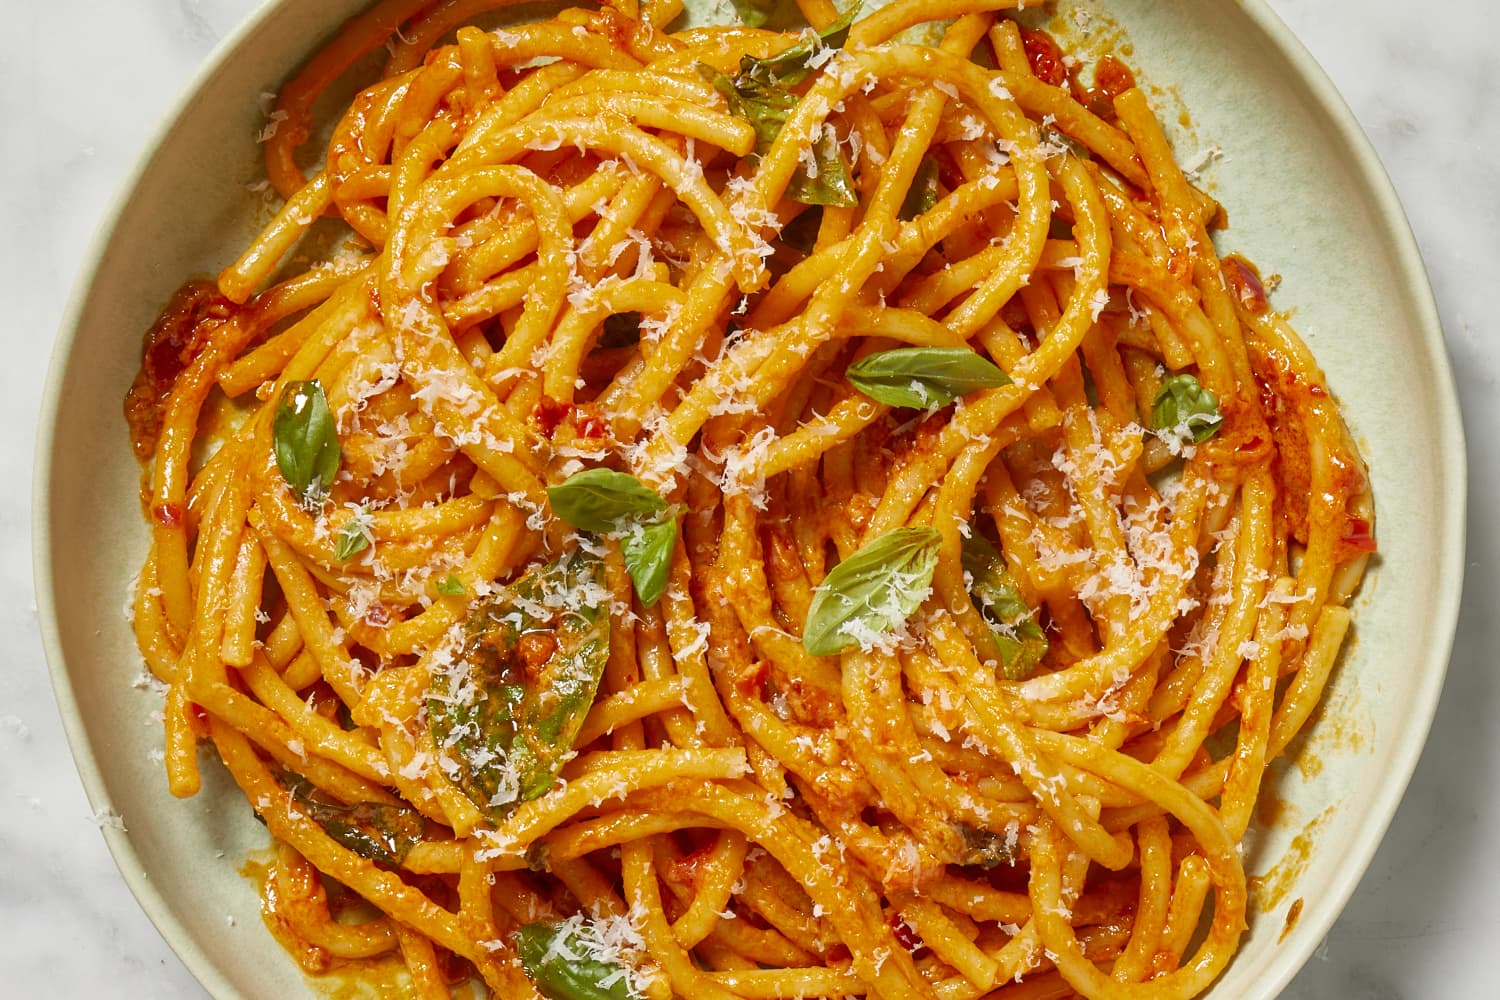 This “Beloved” Jarred Pasta Sauce Tastes Even Better Than Homemade (No, It’s Not Rao’s)